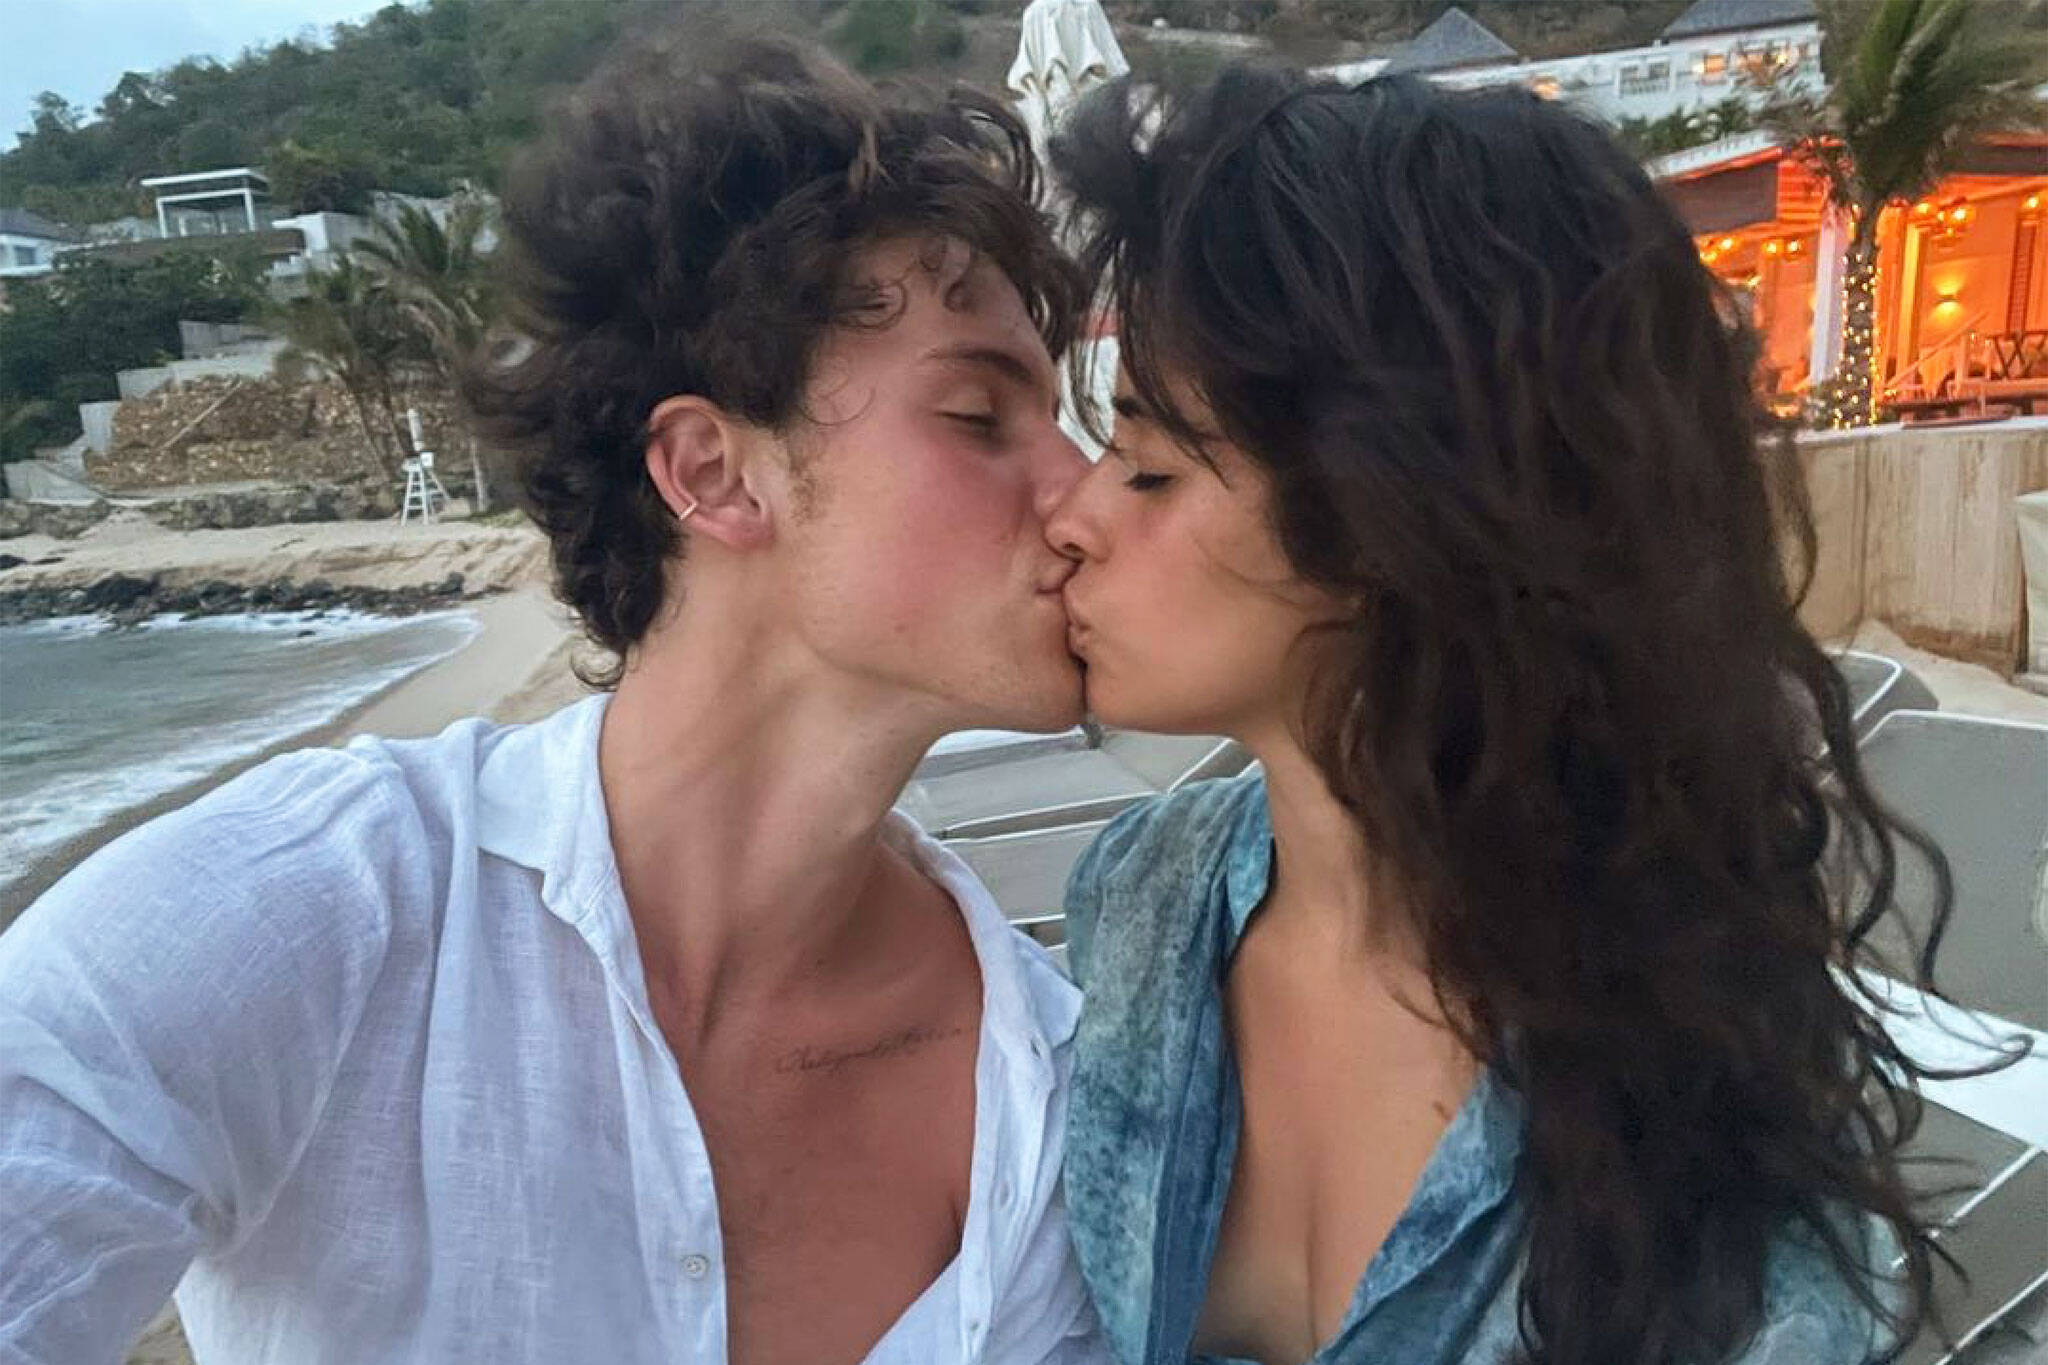 Shawn Mendes And Camila Cabello Break Up And Toronto Is Abuzz With Thoughts